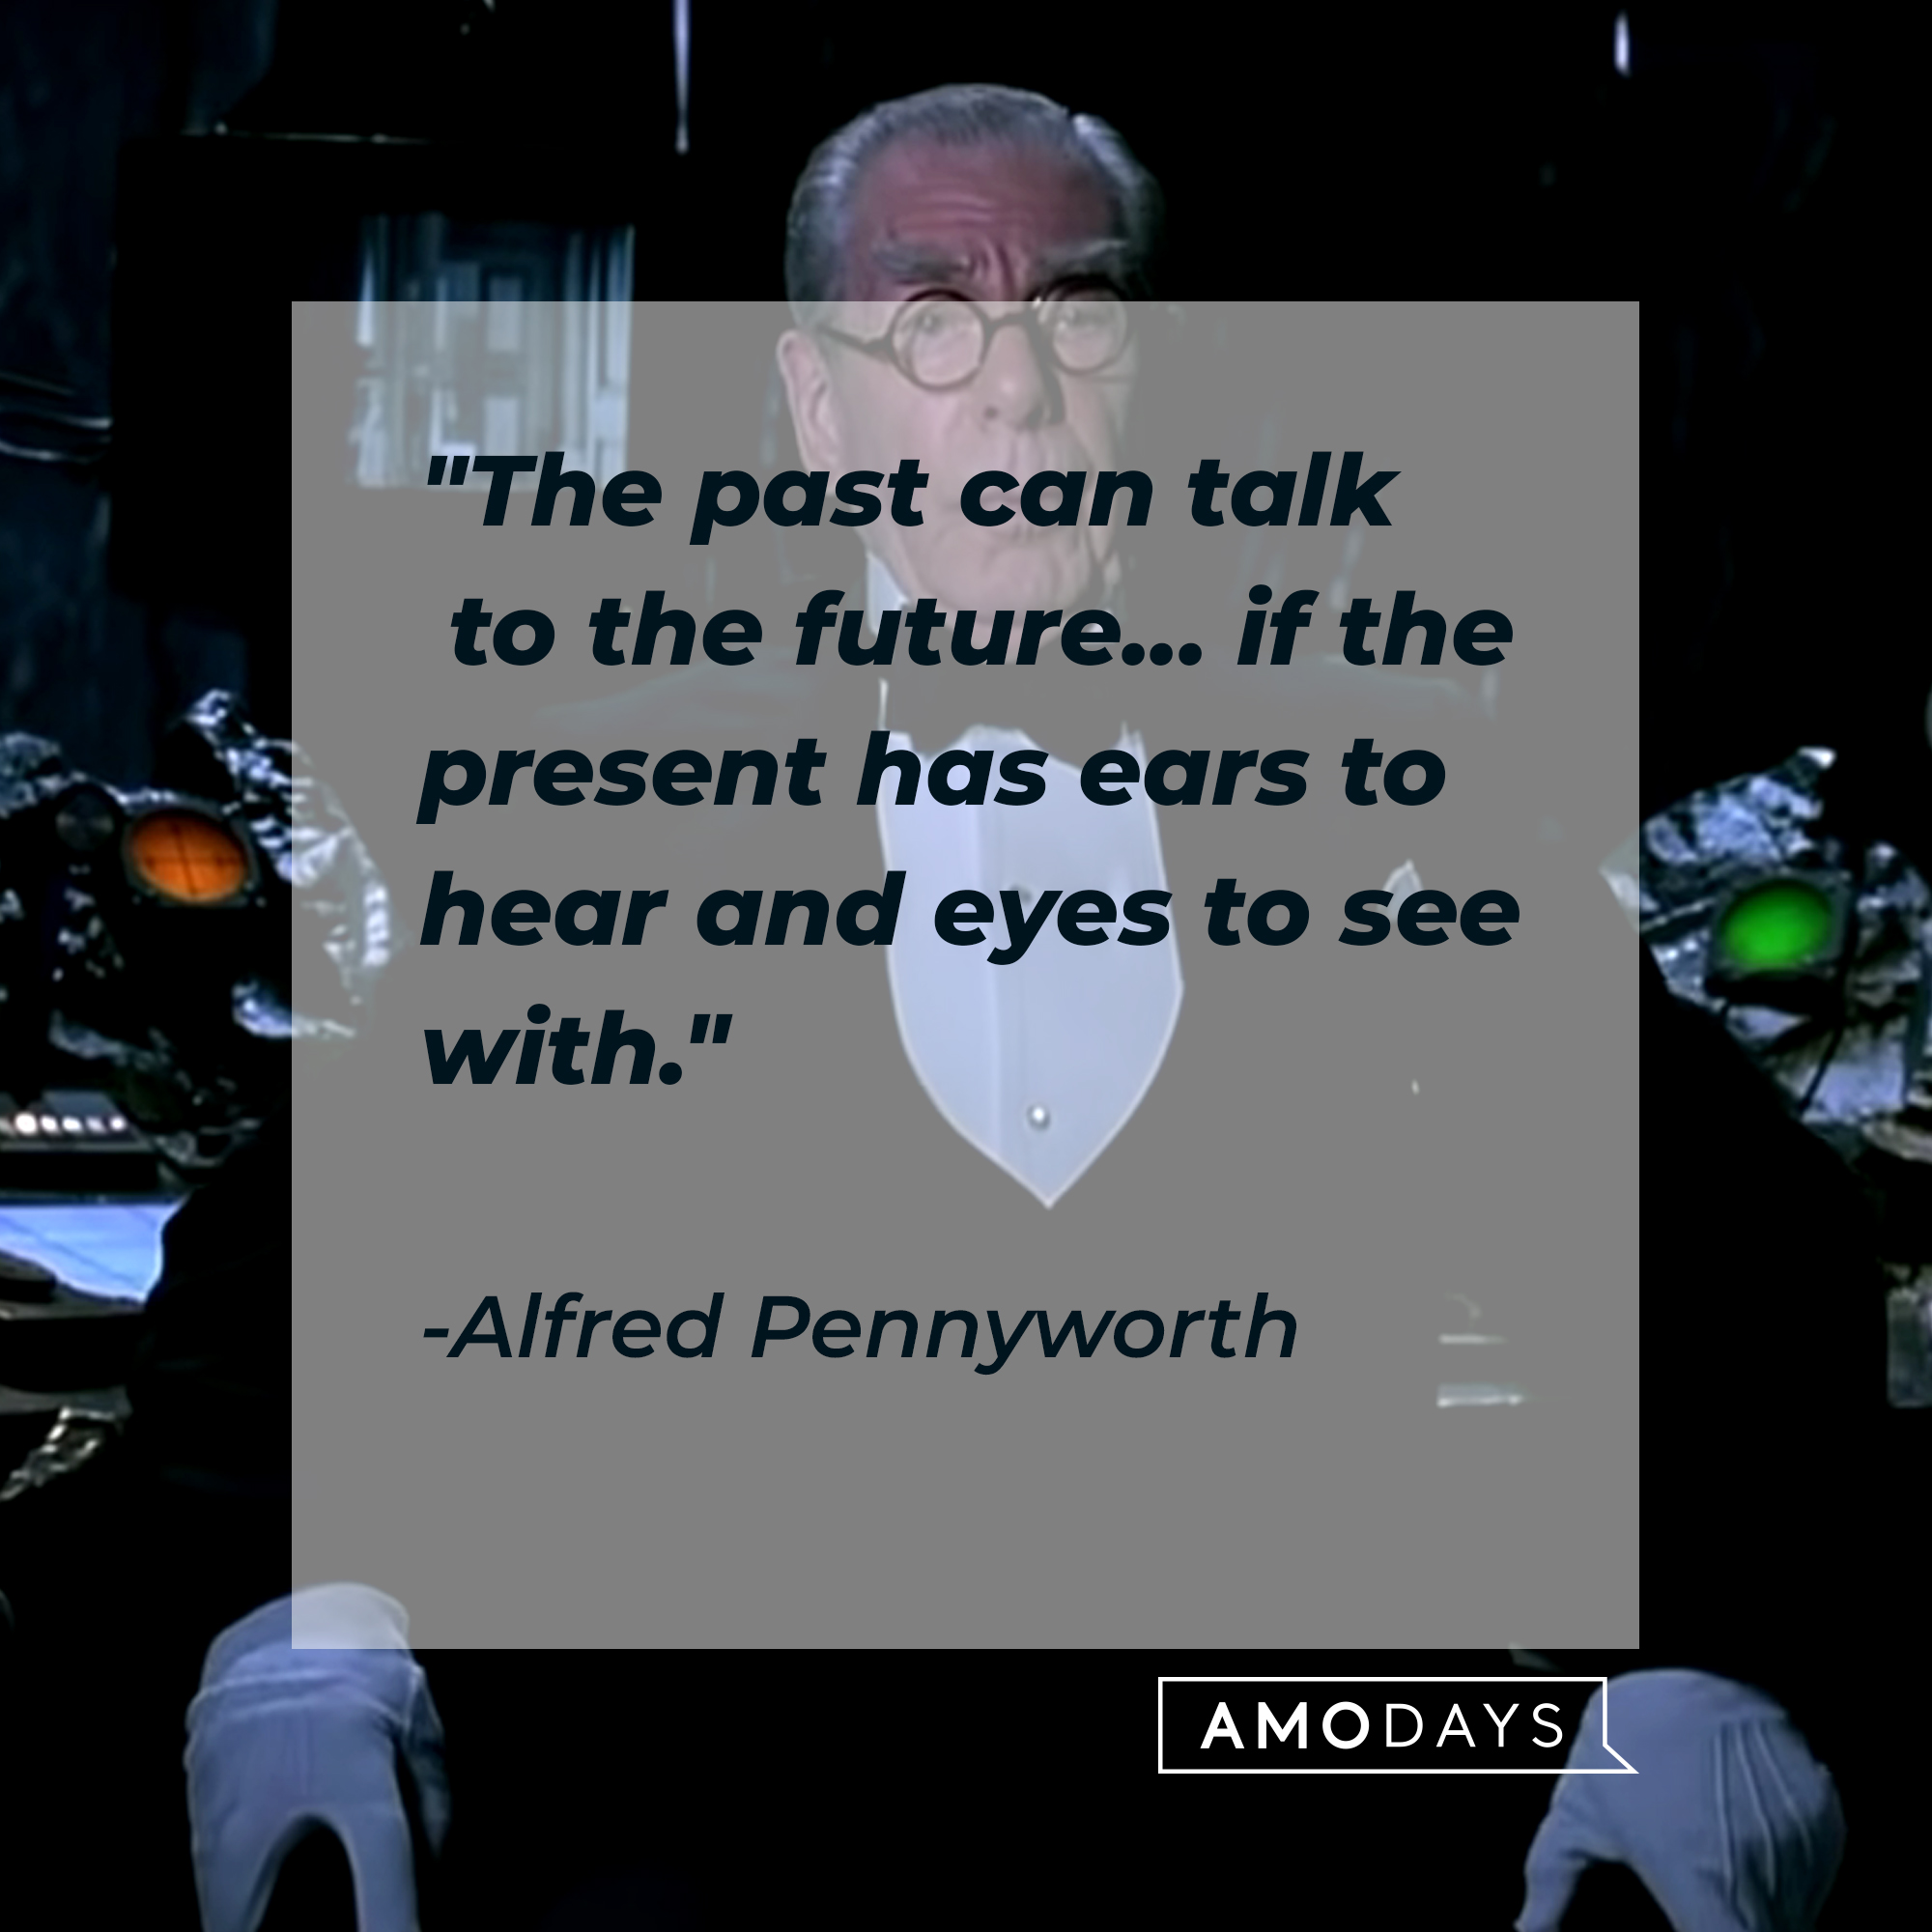 Alfred Pennyworth's quote: "The past can talk to the future... if the present has ears to hear and eyes to see with." | Source: facebook.com/dc